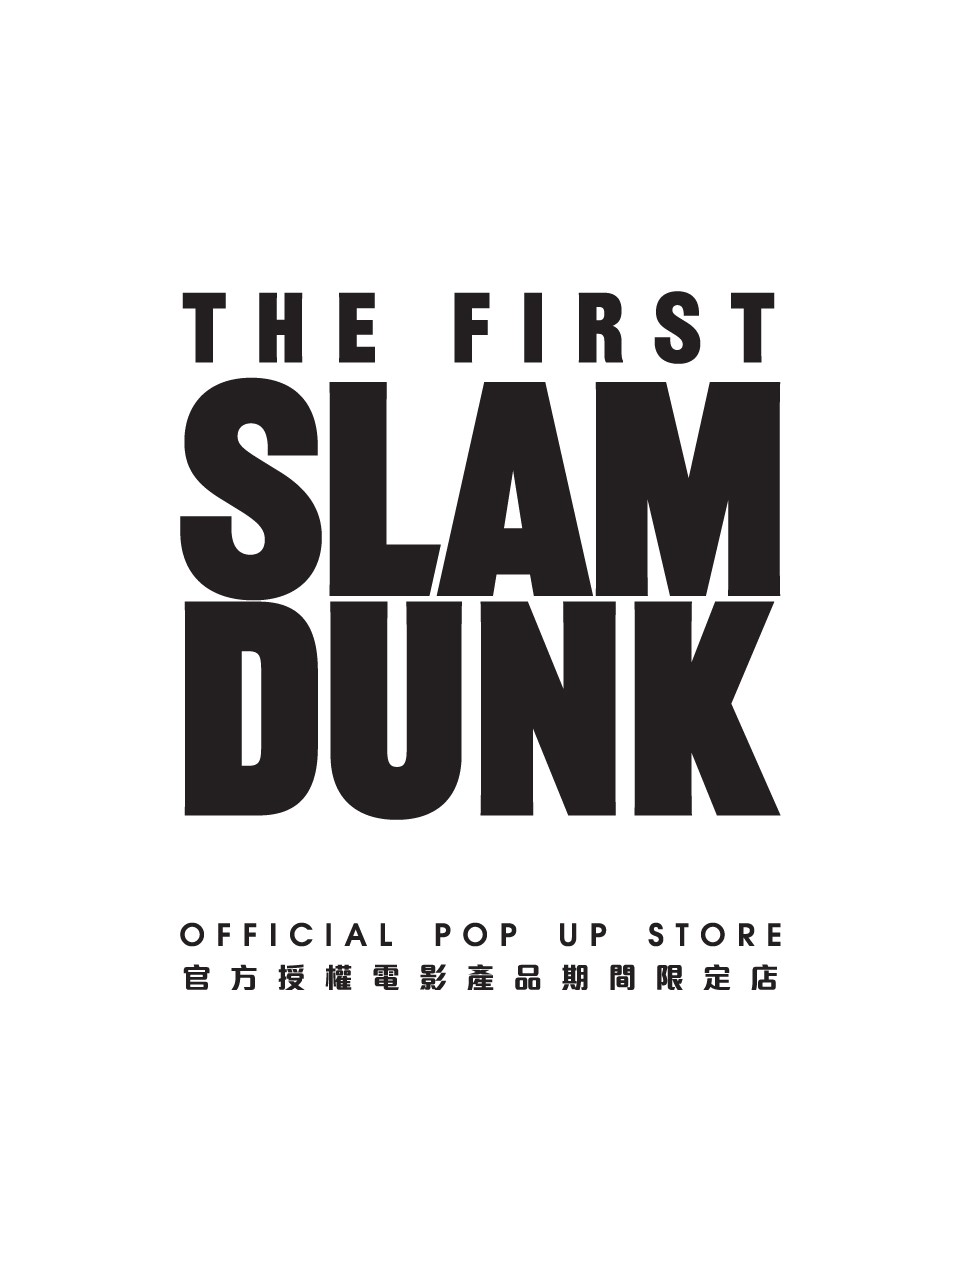 SLAM DUNK “THE FIRST SLAM DUNK” Pop-up store @ Times Square